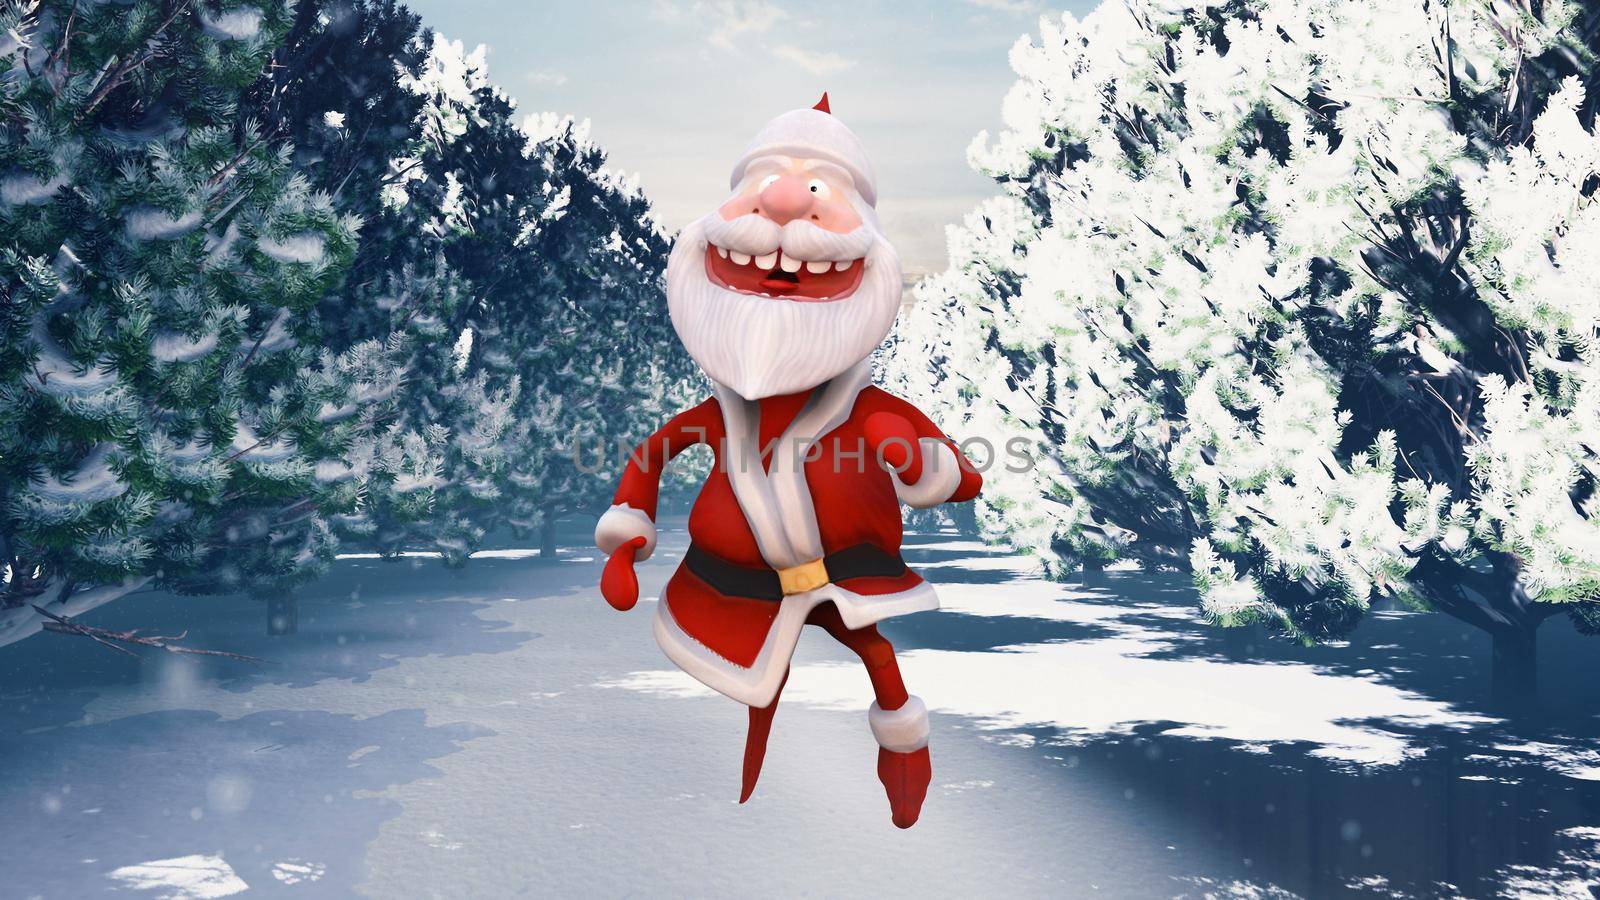 Santa Claus runs through the snow-covered Sunny Christmas forest. The Concept of Christmas.